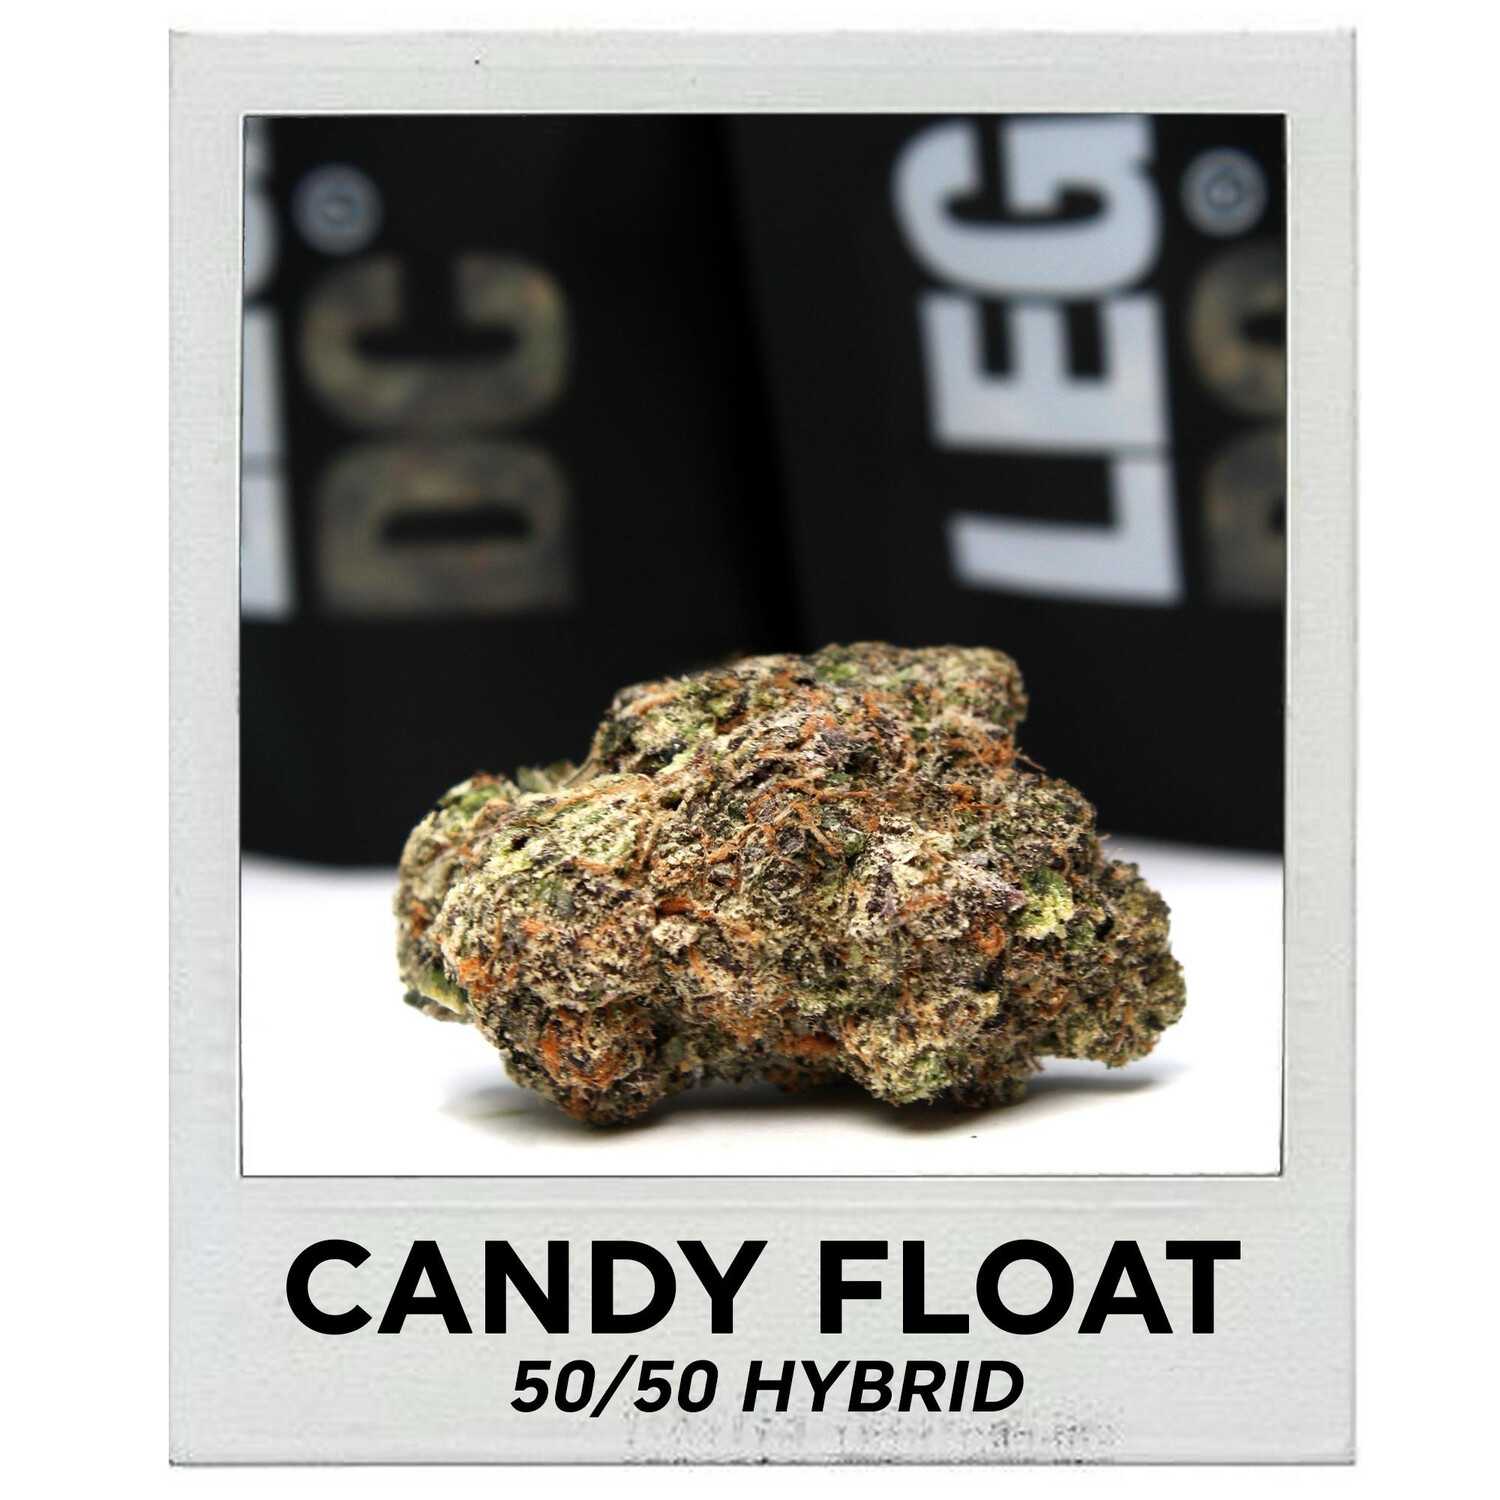 Candy Float